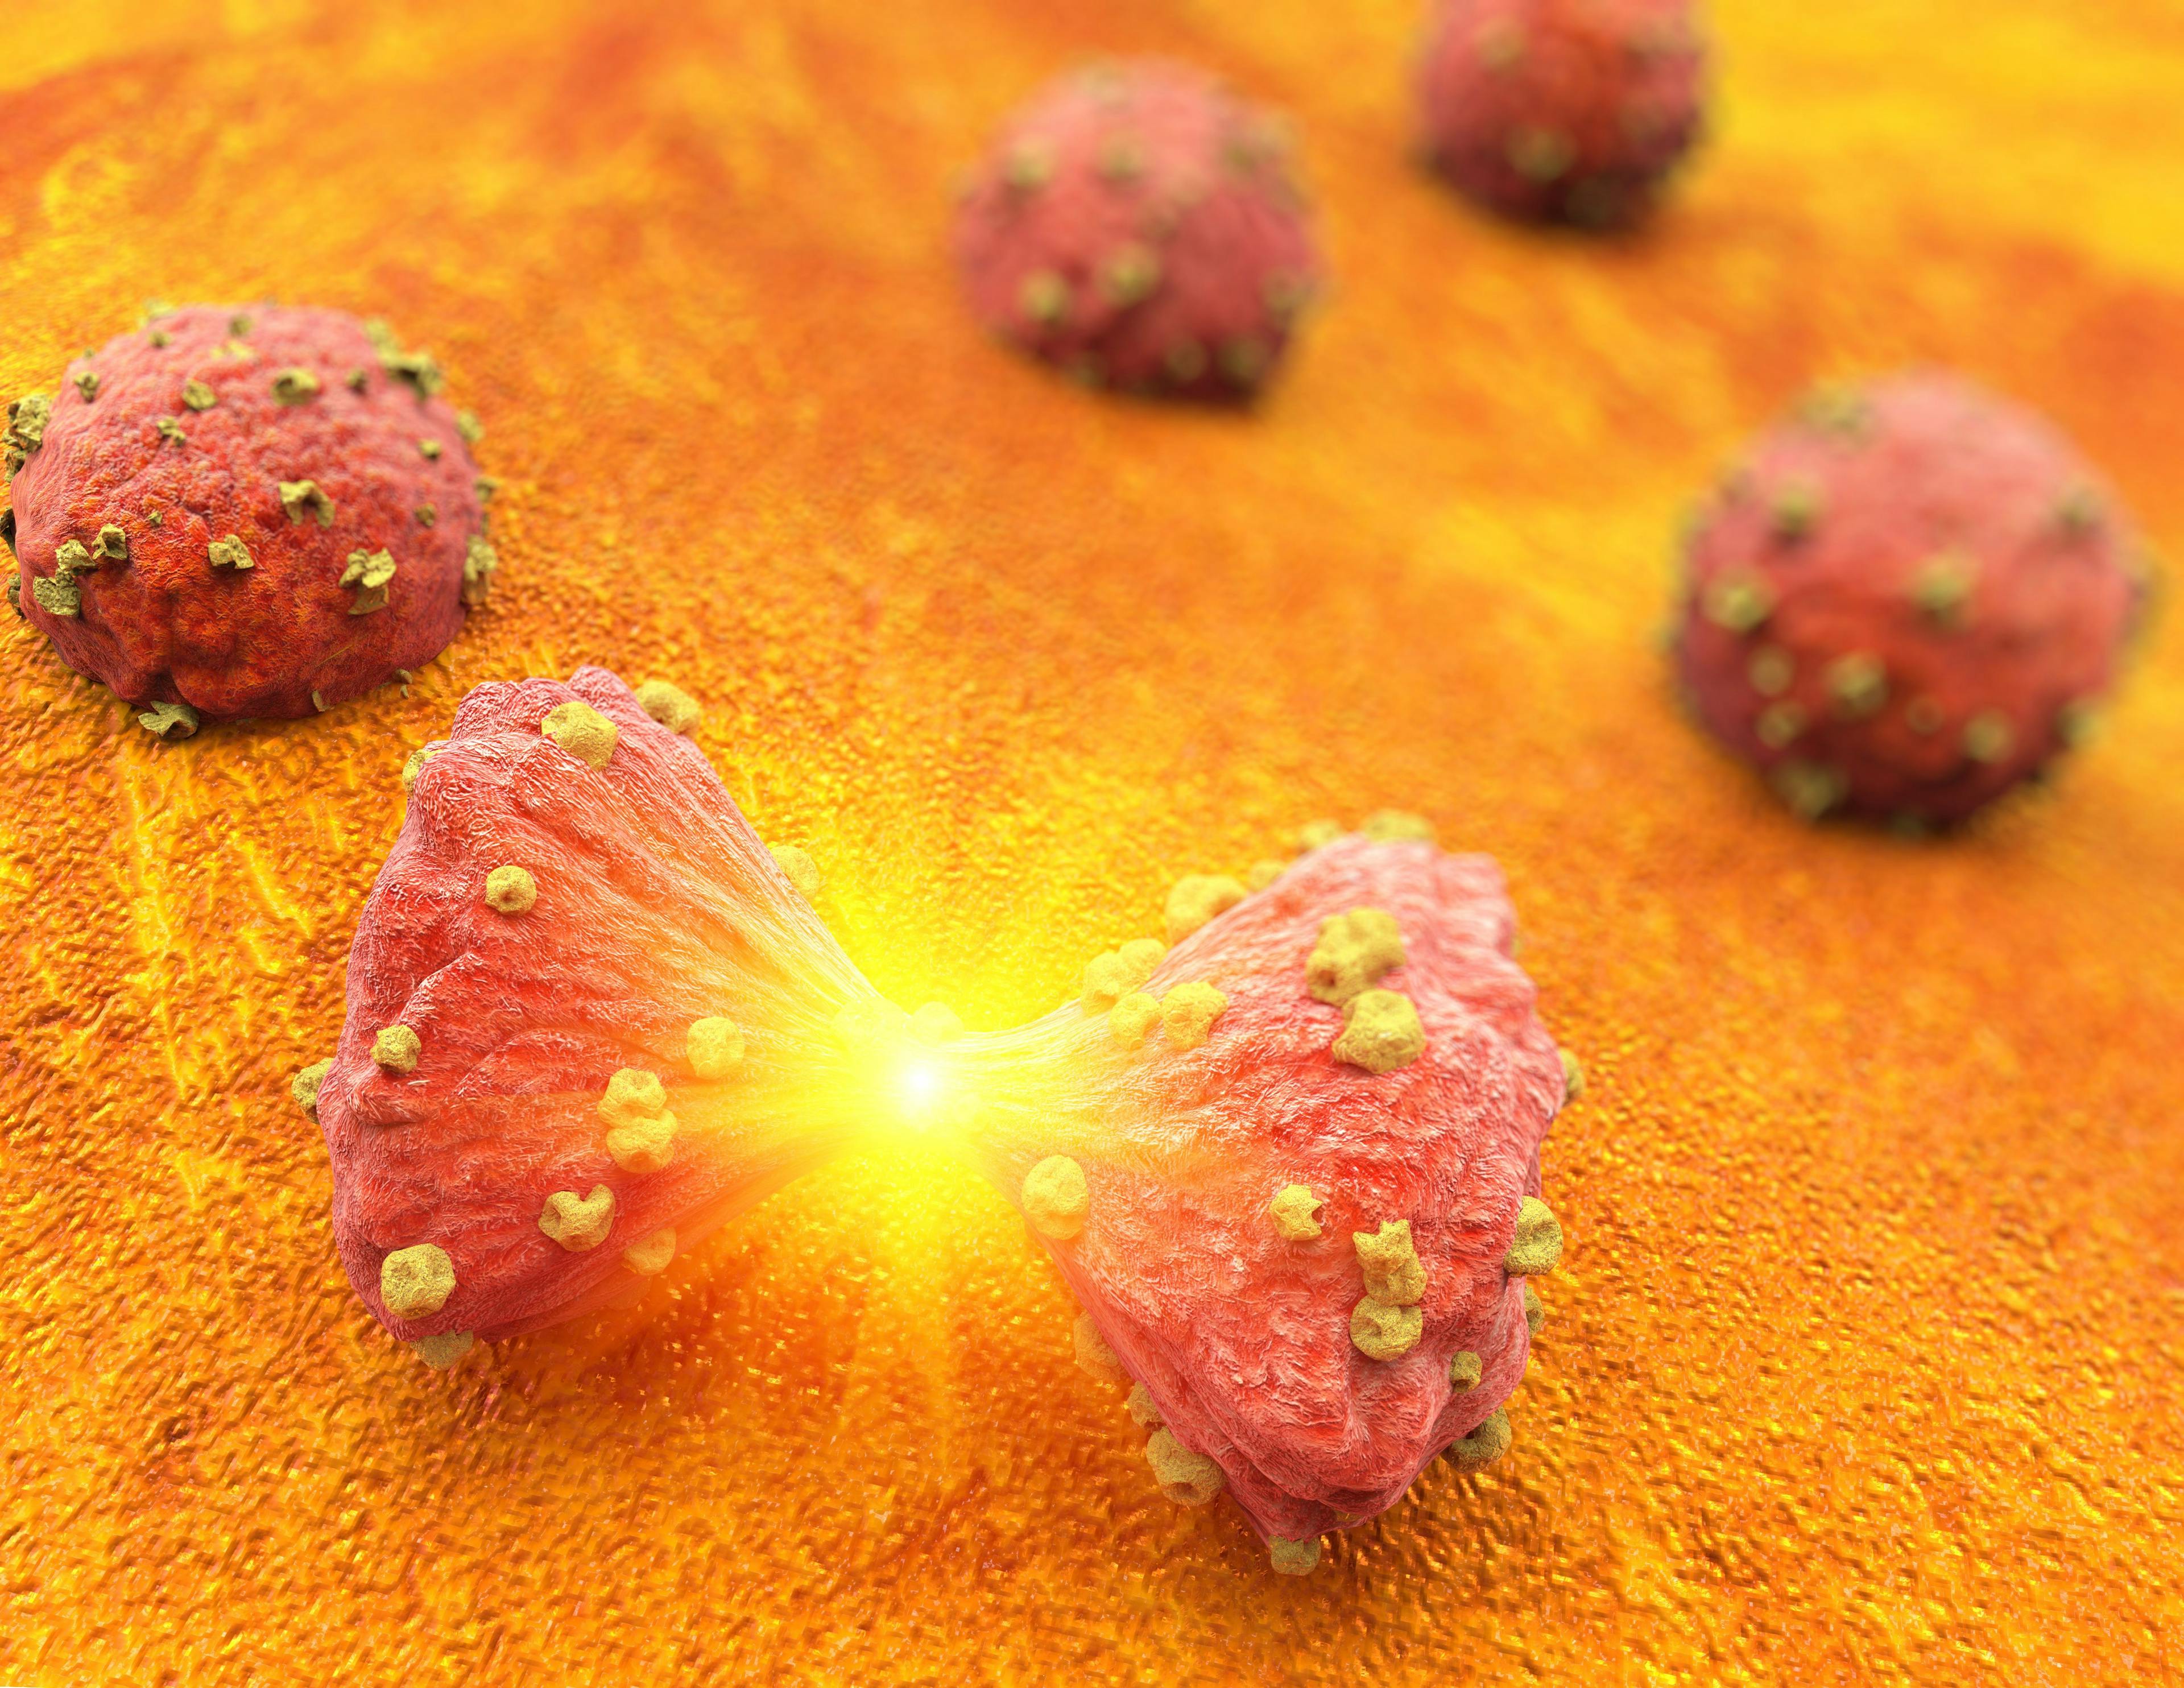 tumor cell in the moment that divides | Image Credit: © Giovanni Cancemi - www.stock.adobe.com